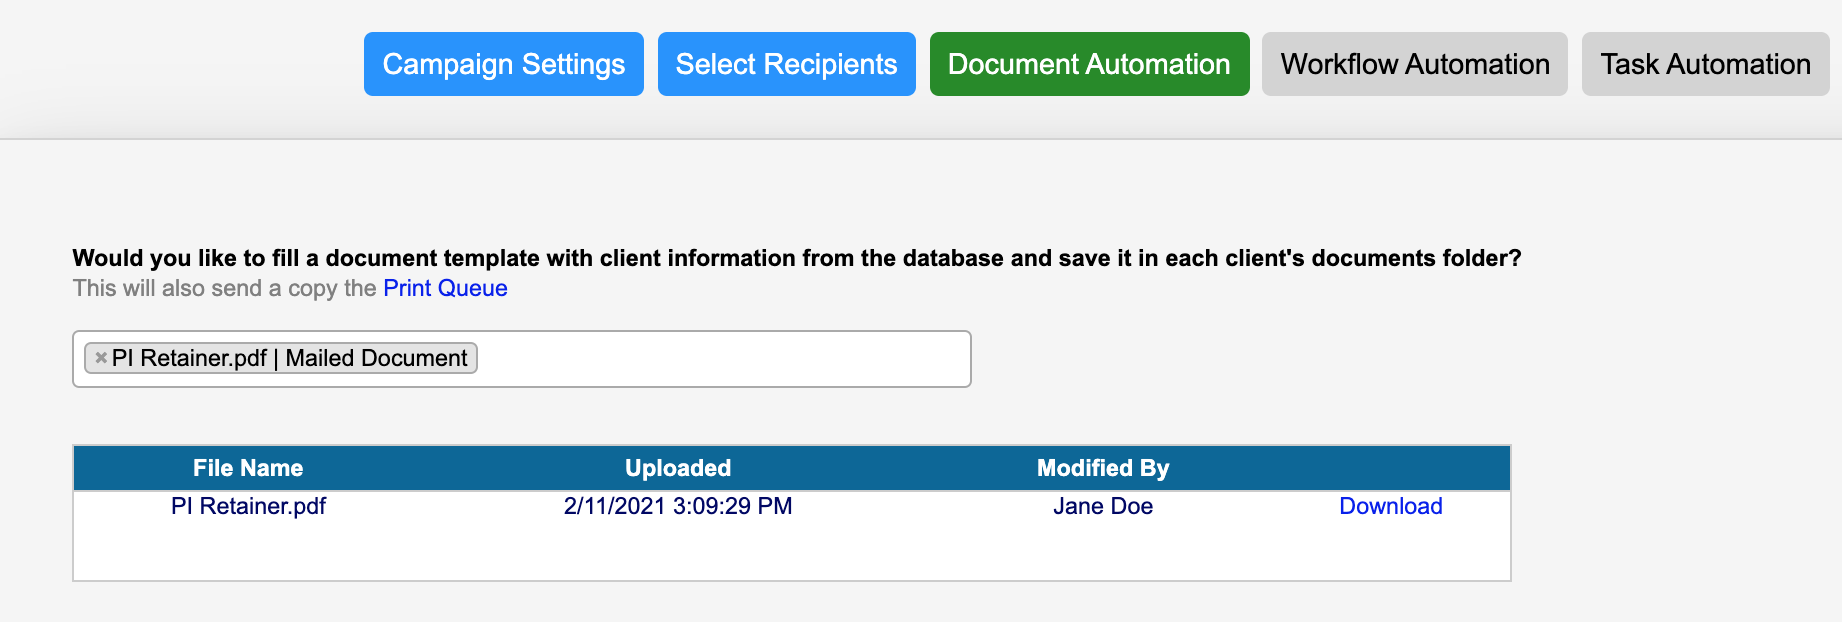 document_automation_1.png